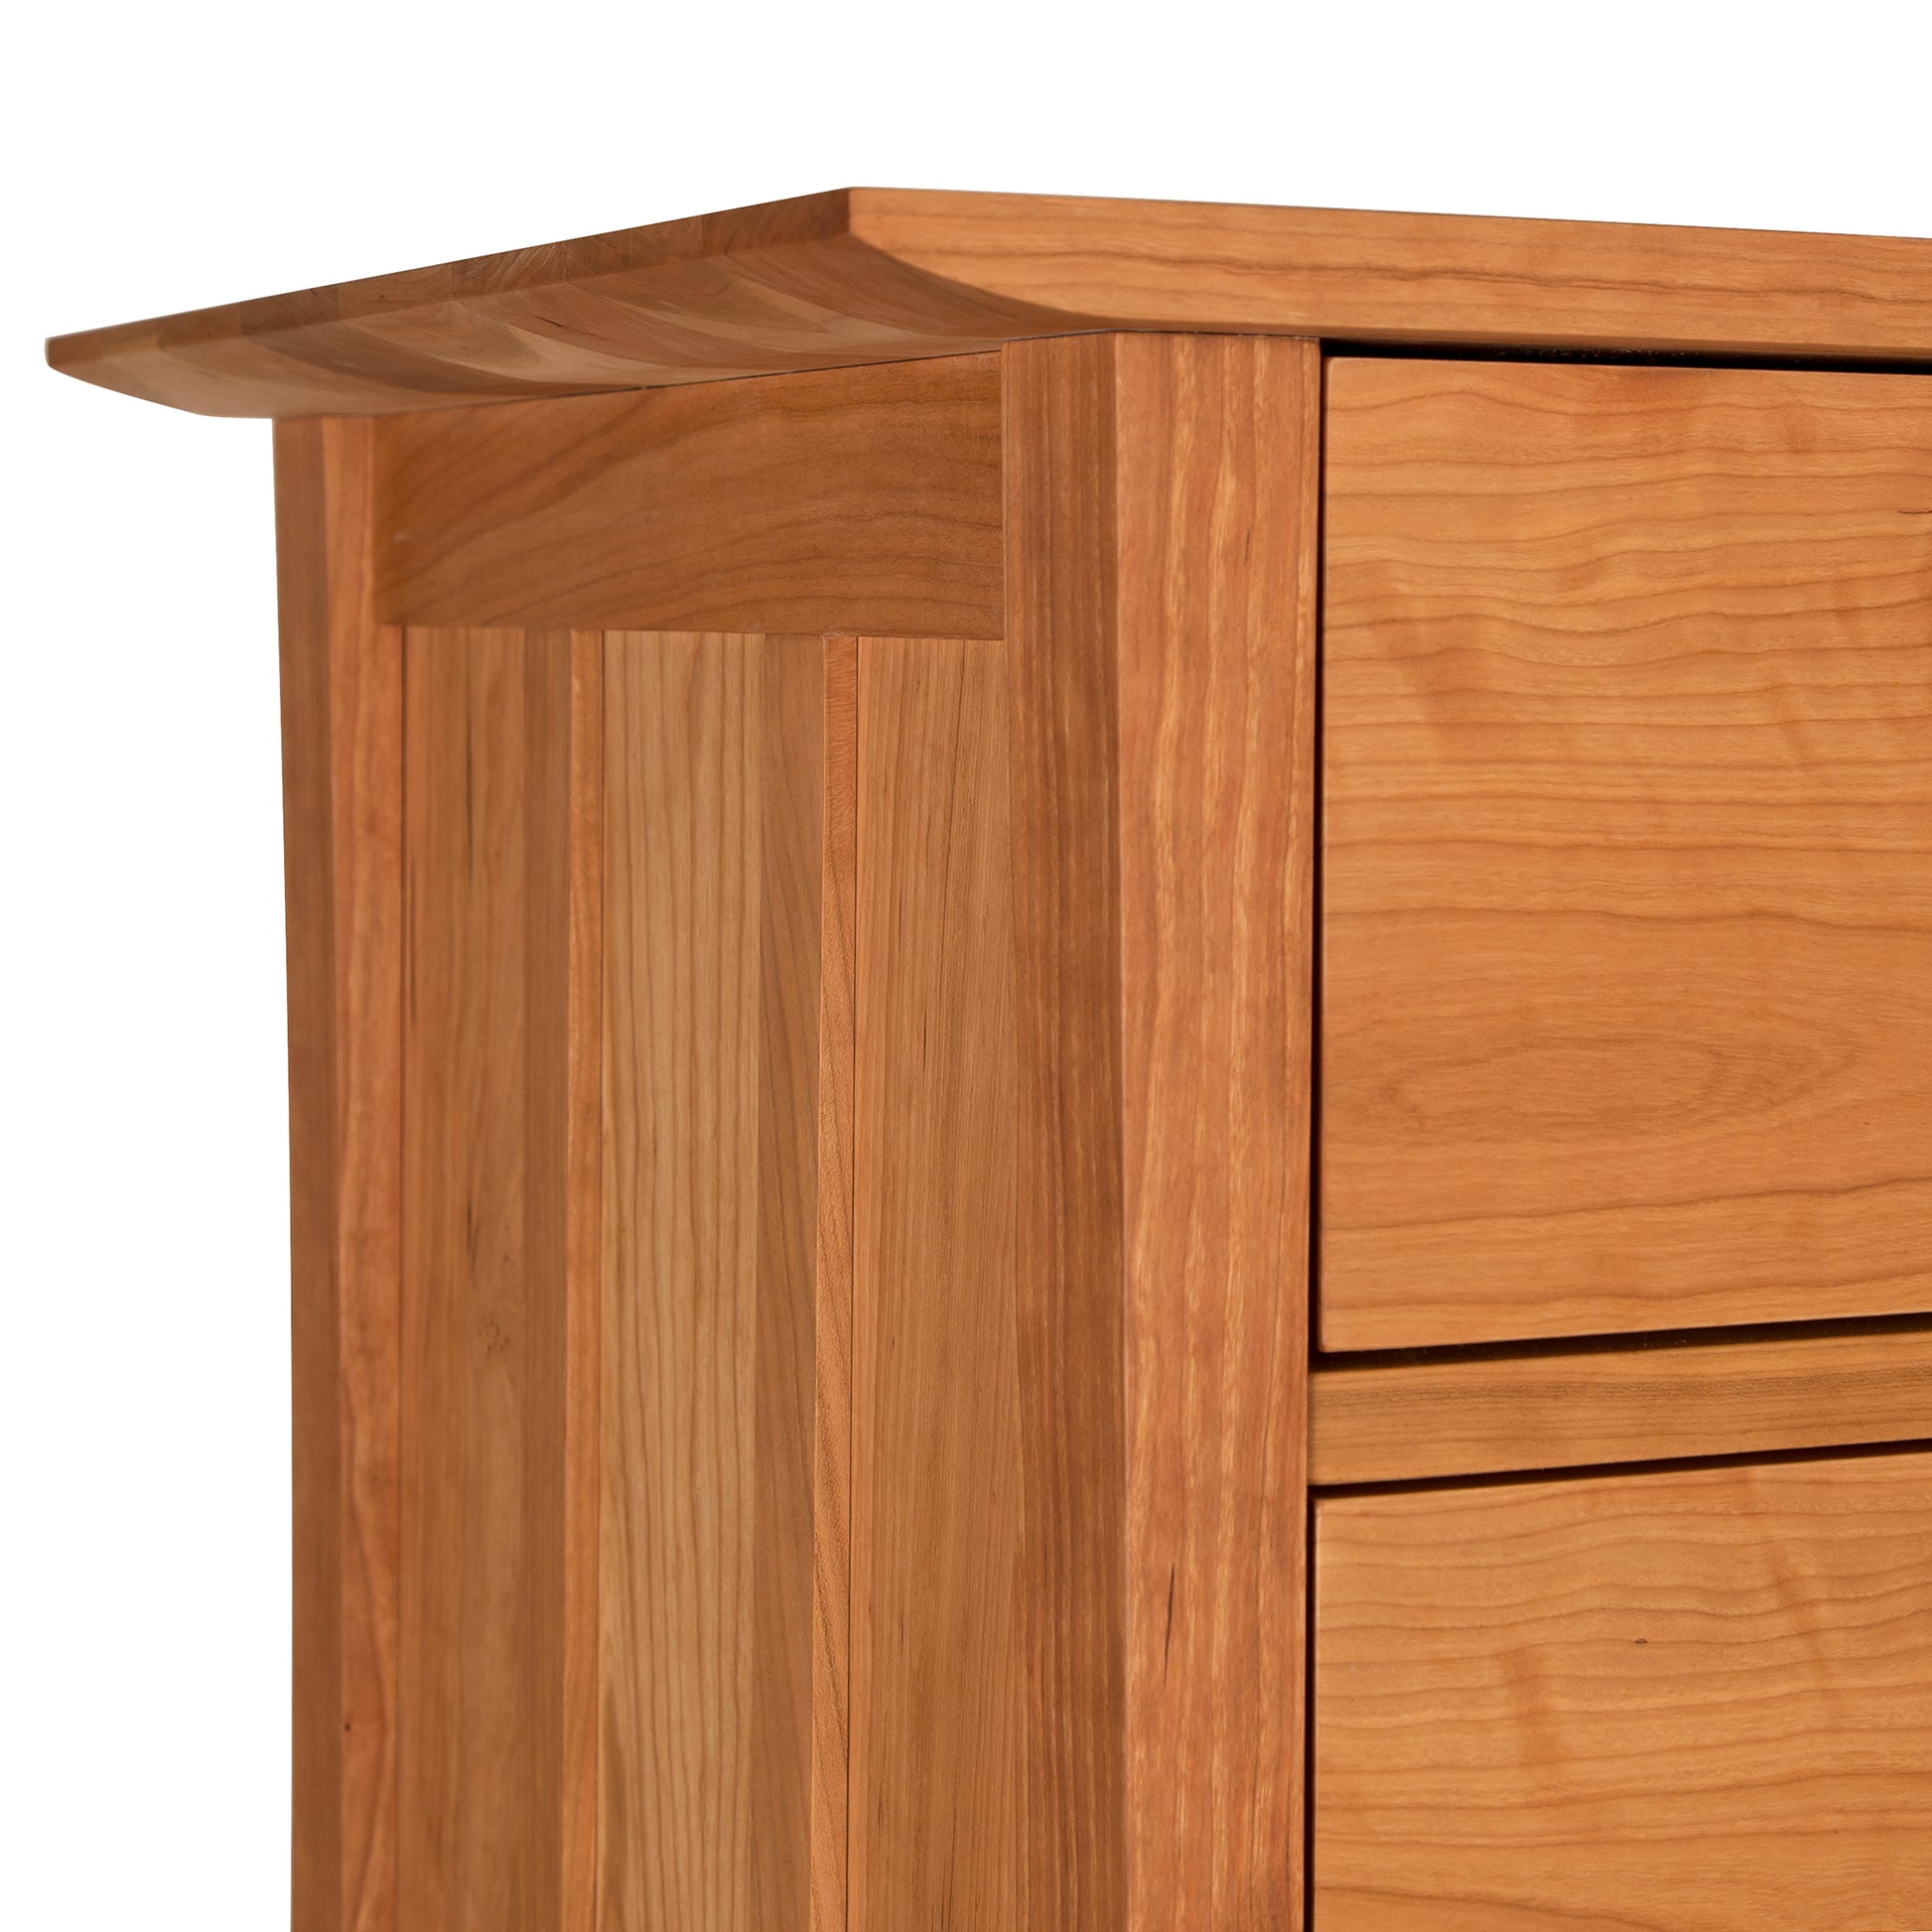 Contemporary Craftsman 4-Drawer Chest from Vermont Furniture Designs with visible drawers and an eco-friendly smooth finish.